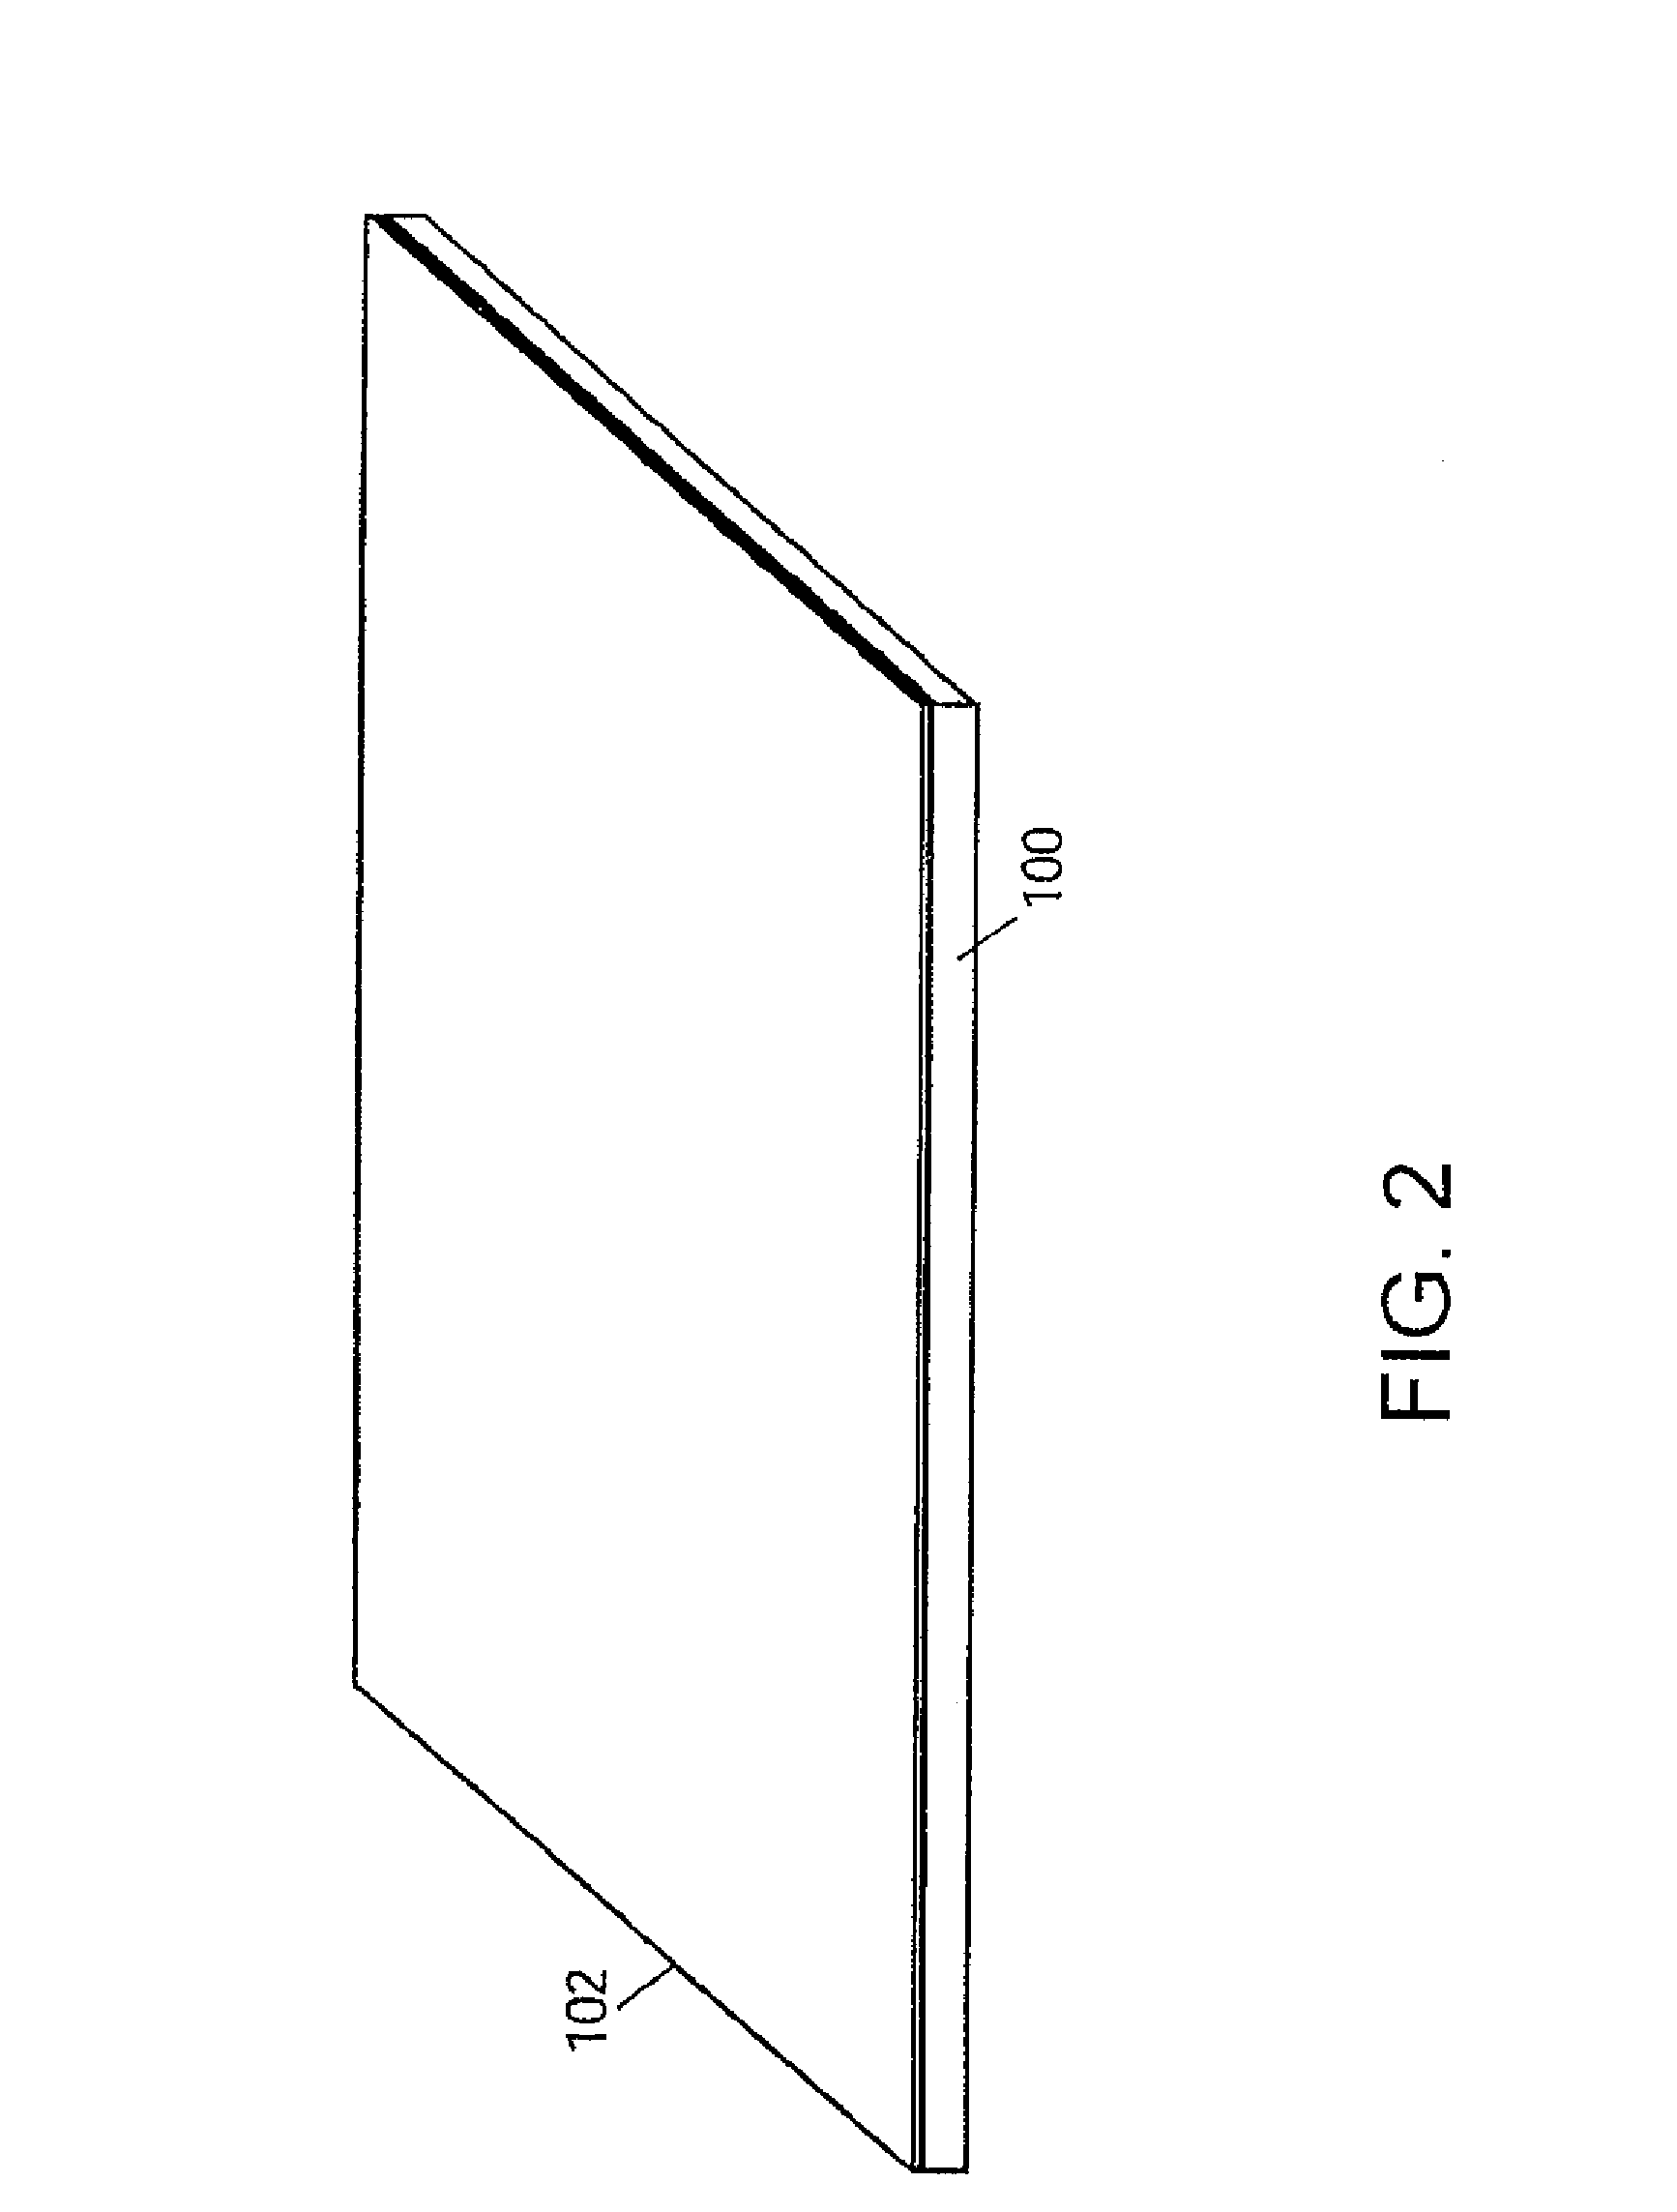 Method for fabricating a structure for a microelectromechanical systems (MEMS) device